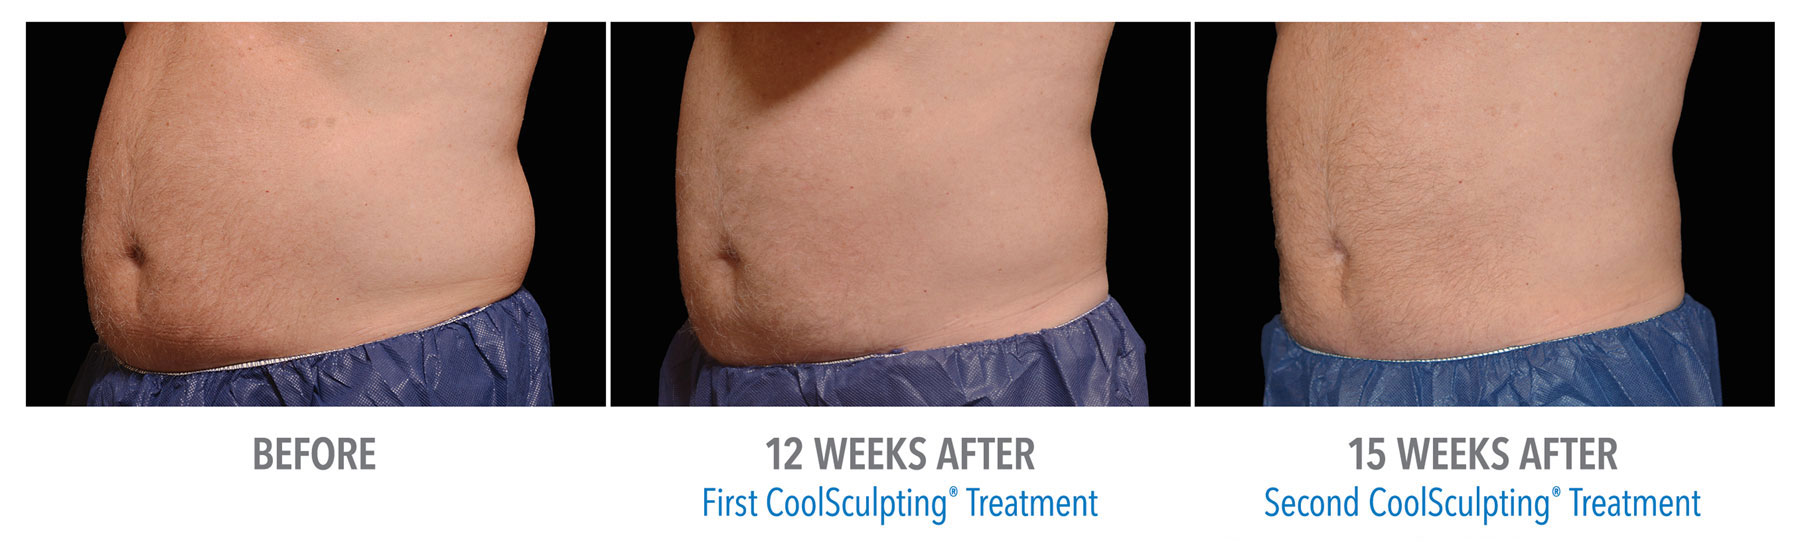 CoolSculpting-Before-After-Male-Abdomen-10